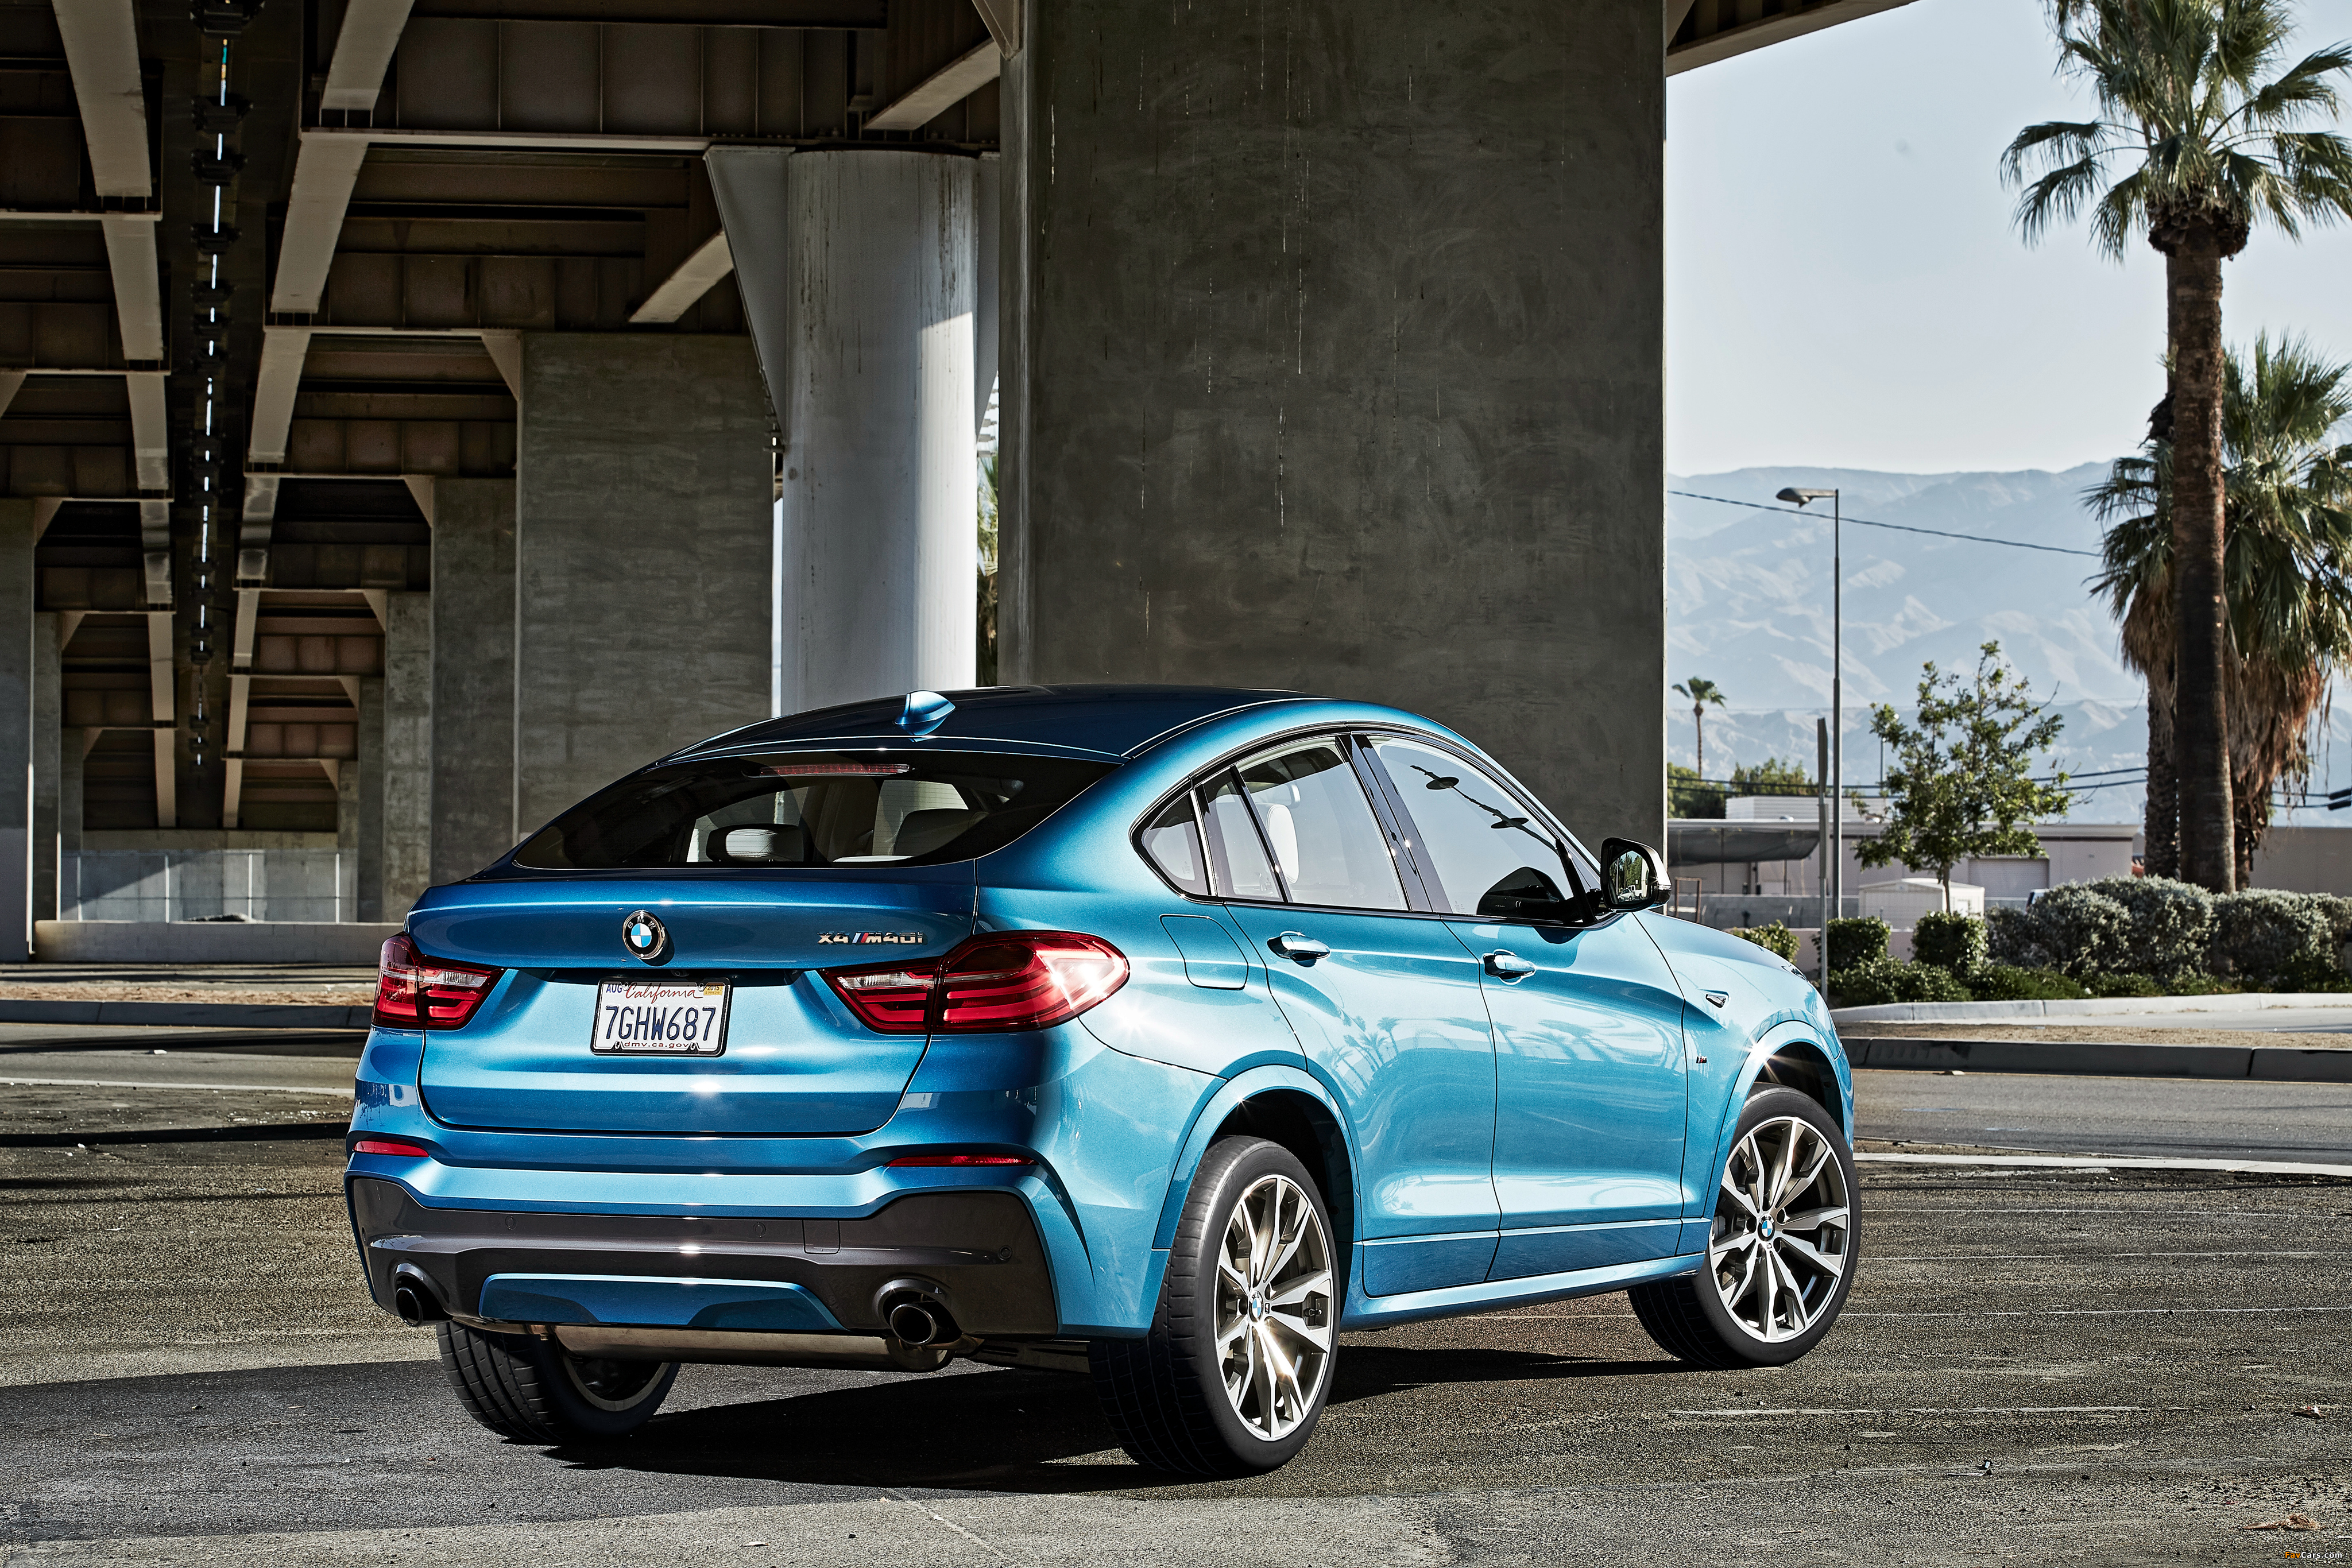 BMW X4 M40i (F26) 2015 pictures (4096 x 2731)